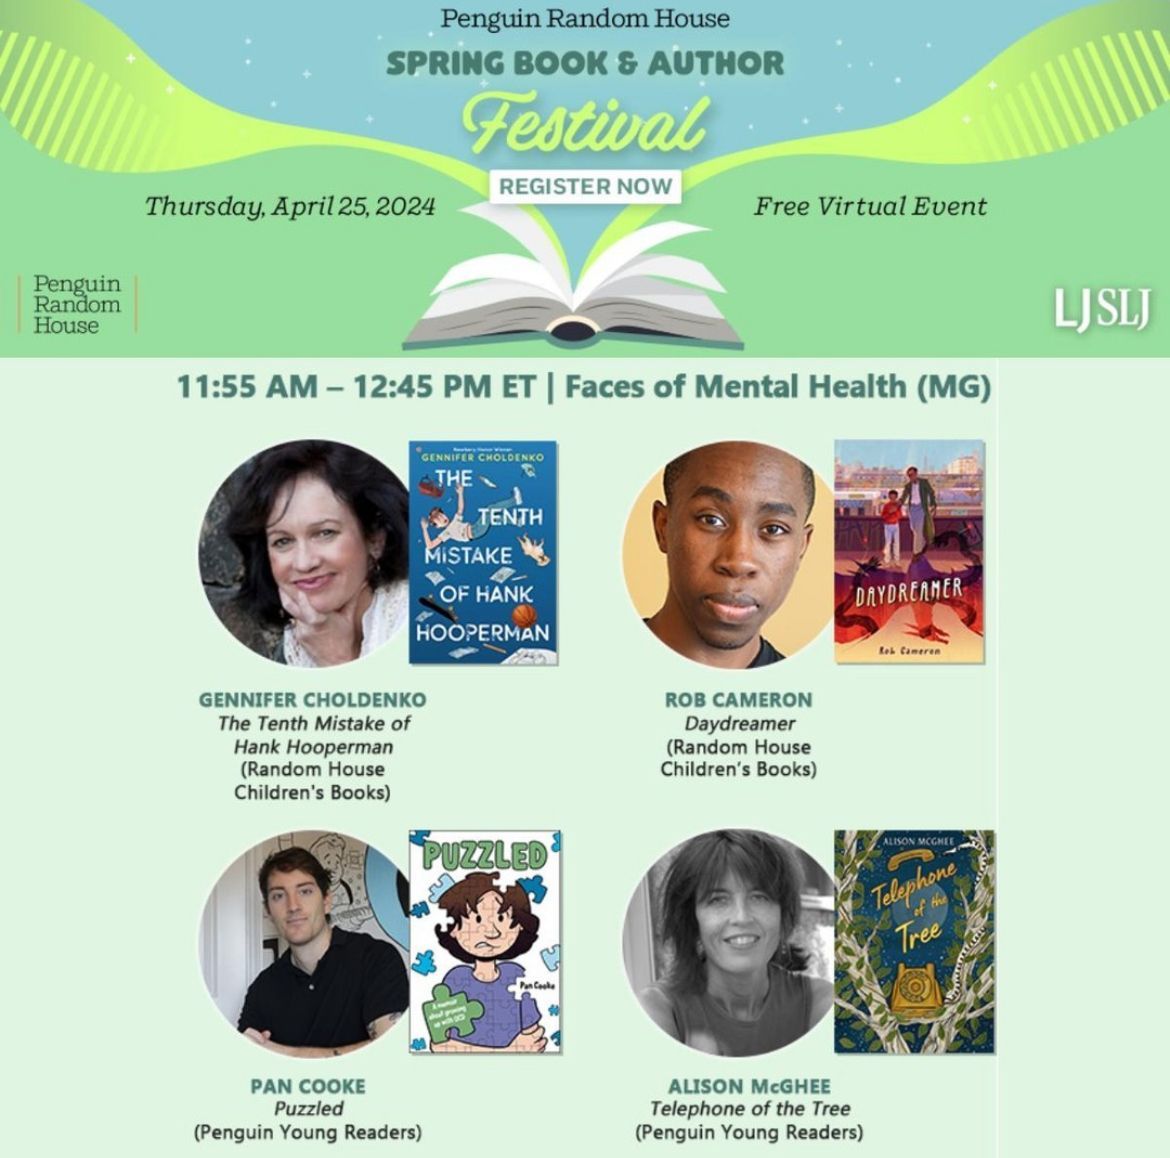 Dear teachers and librarians, I hope you'll check out this Thursday's @PenguinClass, @LibraryJournal, & @sljournal Spring 2024 Virtual #PRHBookFest! I'll be on a panel with Alison McGhee, @cooke_pan, & @cprwords, and I can't wait. Register free here! libraryjournal.com/event/prh-spri…